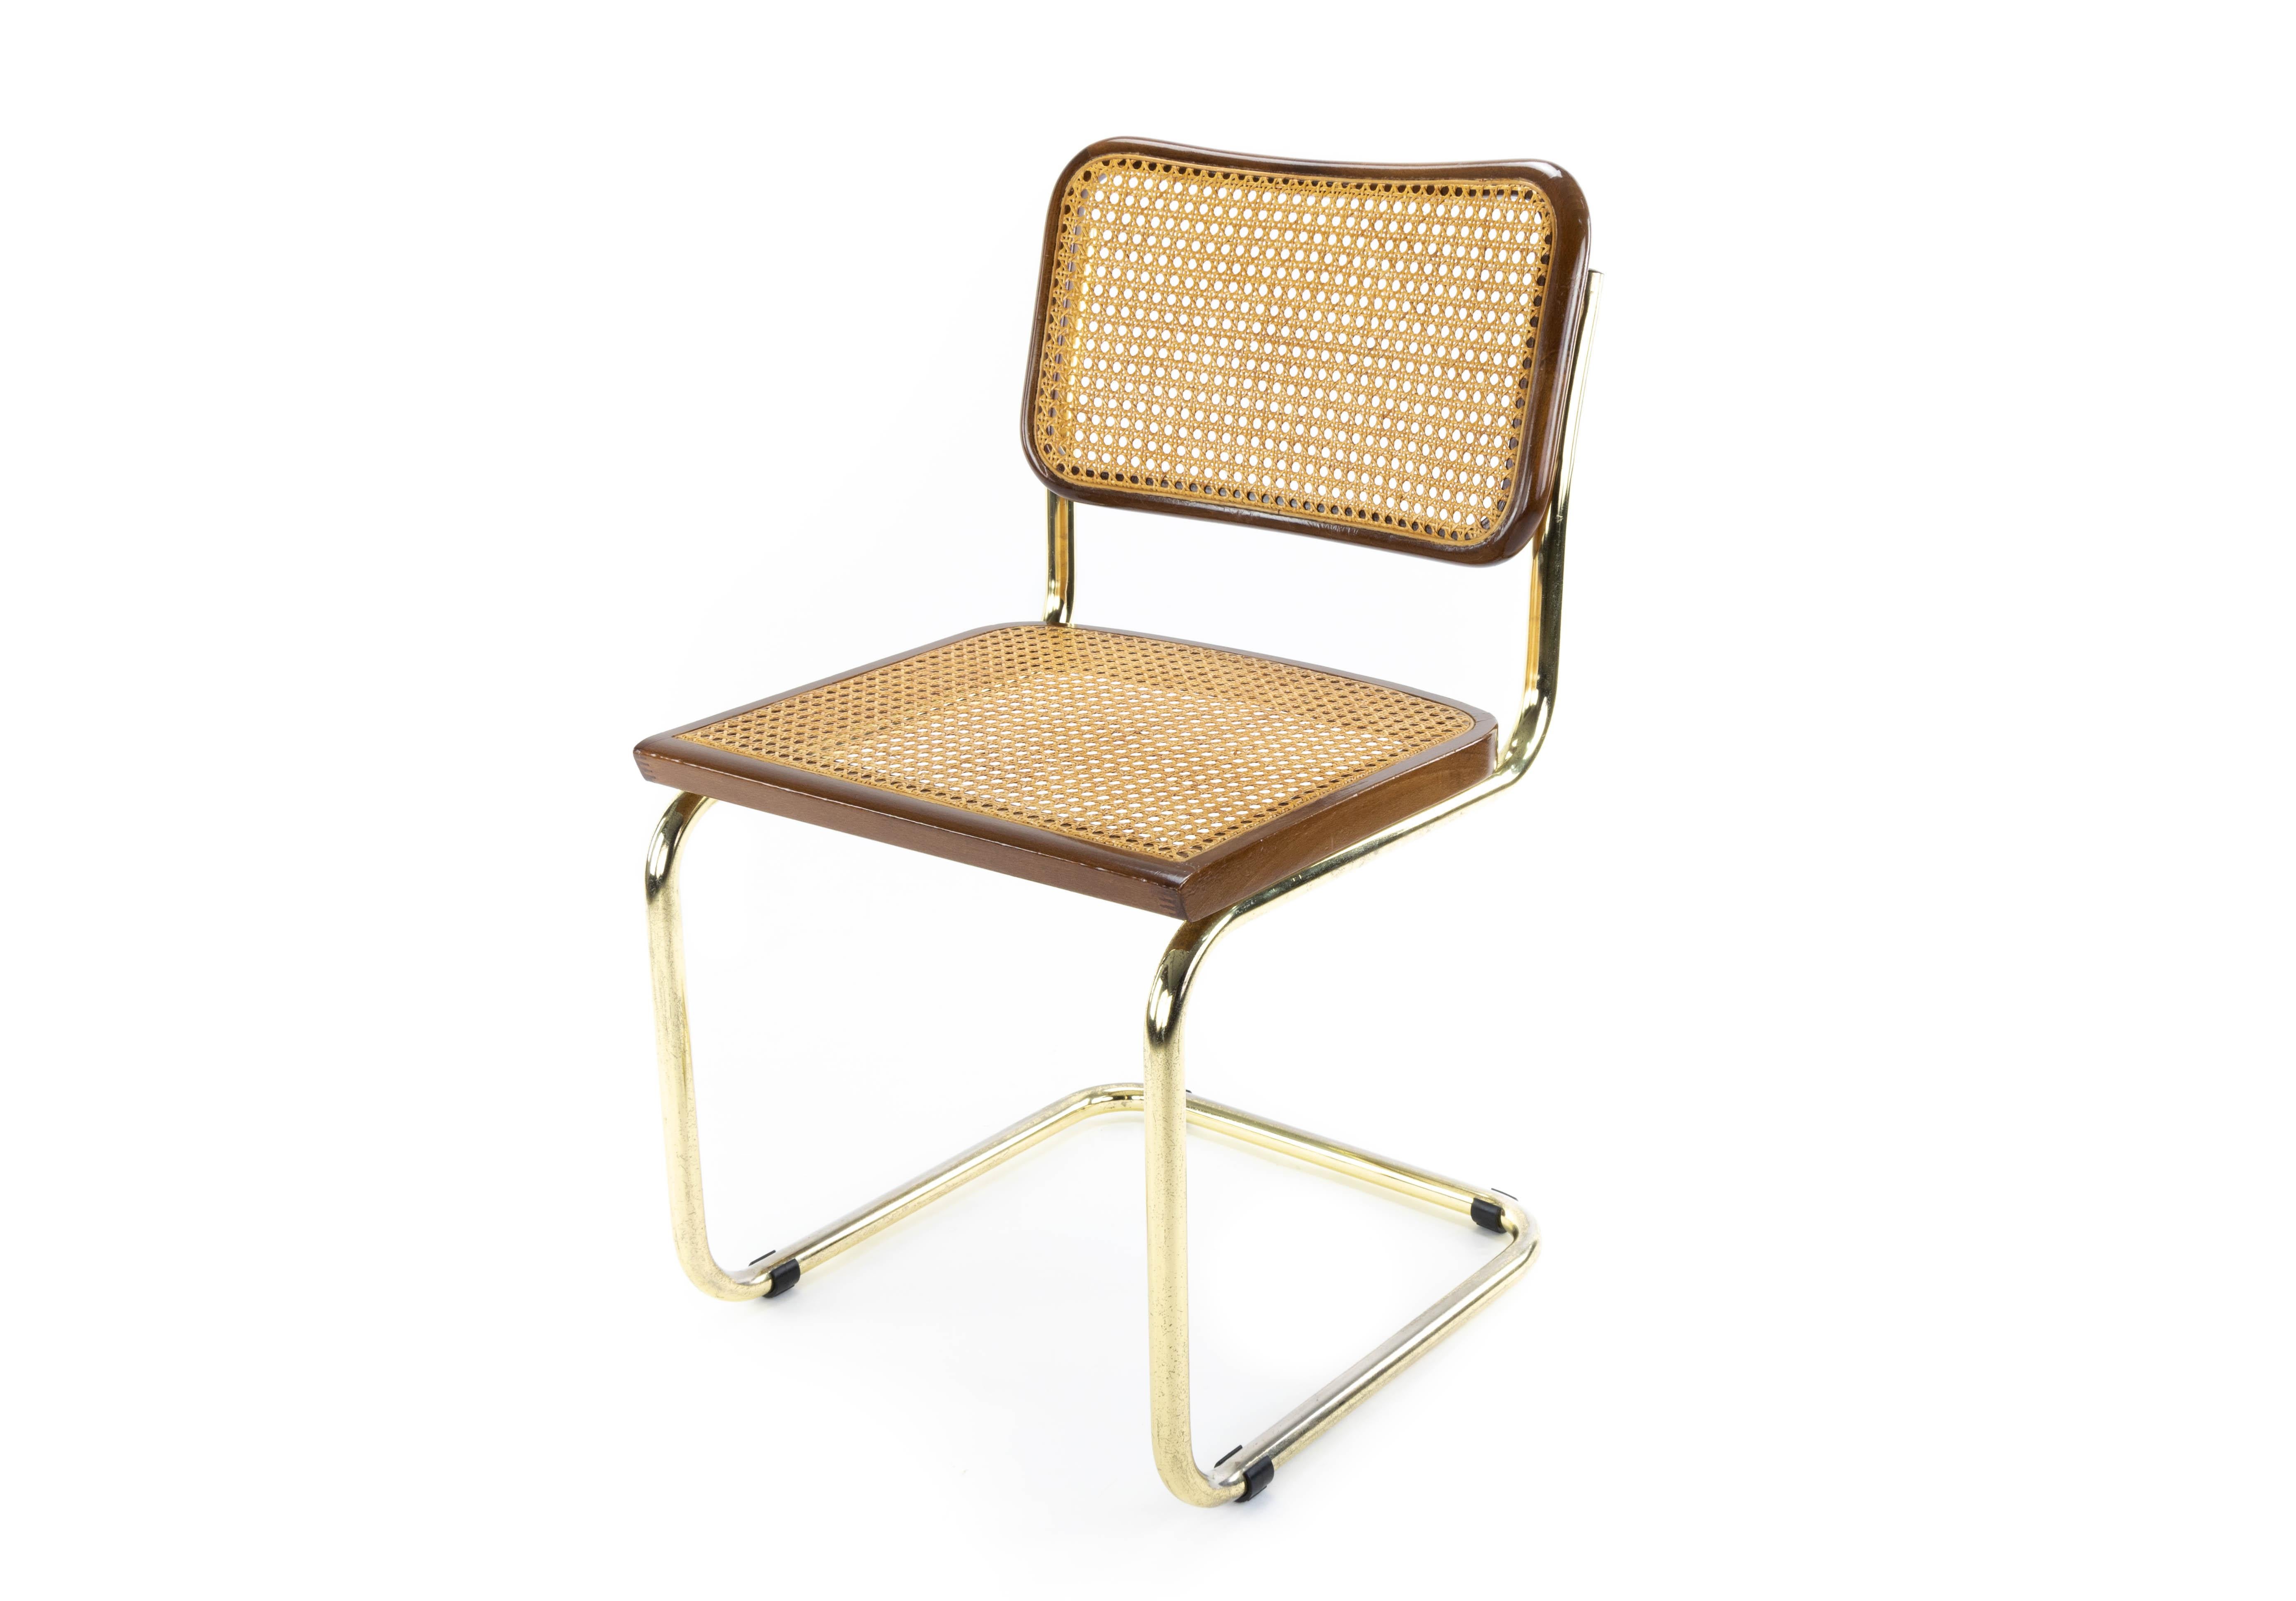 Cesca B32 chair designed by Marcel Breuer of Italian manufacture in the decade of the 1970s.
Brass steel structure, beechwood frames with walnut finish and Viennese natural fiber grid.
The seat grid has been changed and is brand new.
Very good